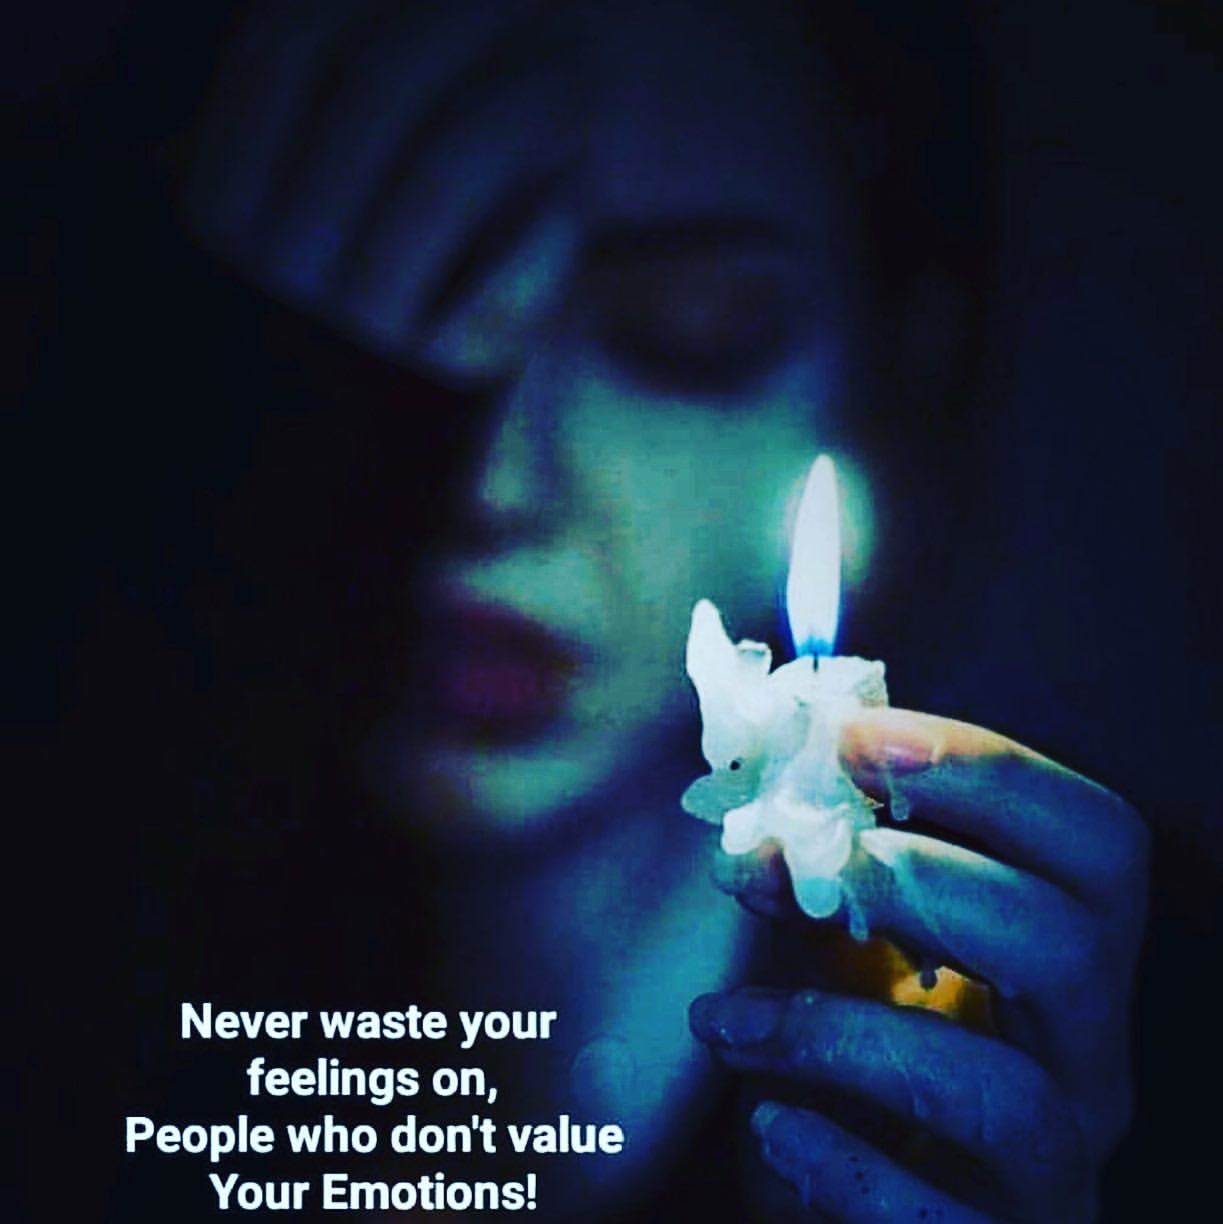 Never waste your feelings on, people who don't value your emotions!